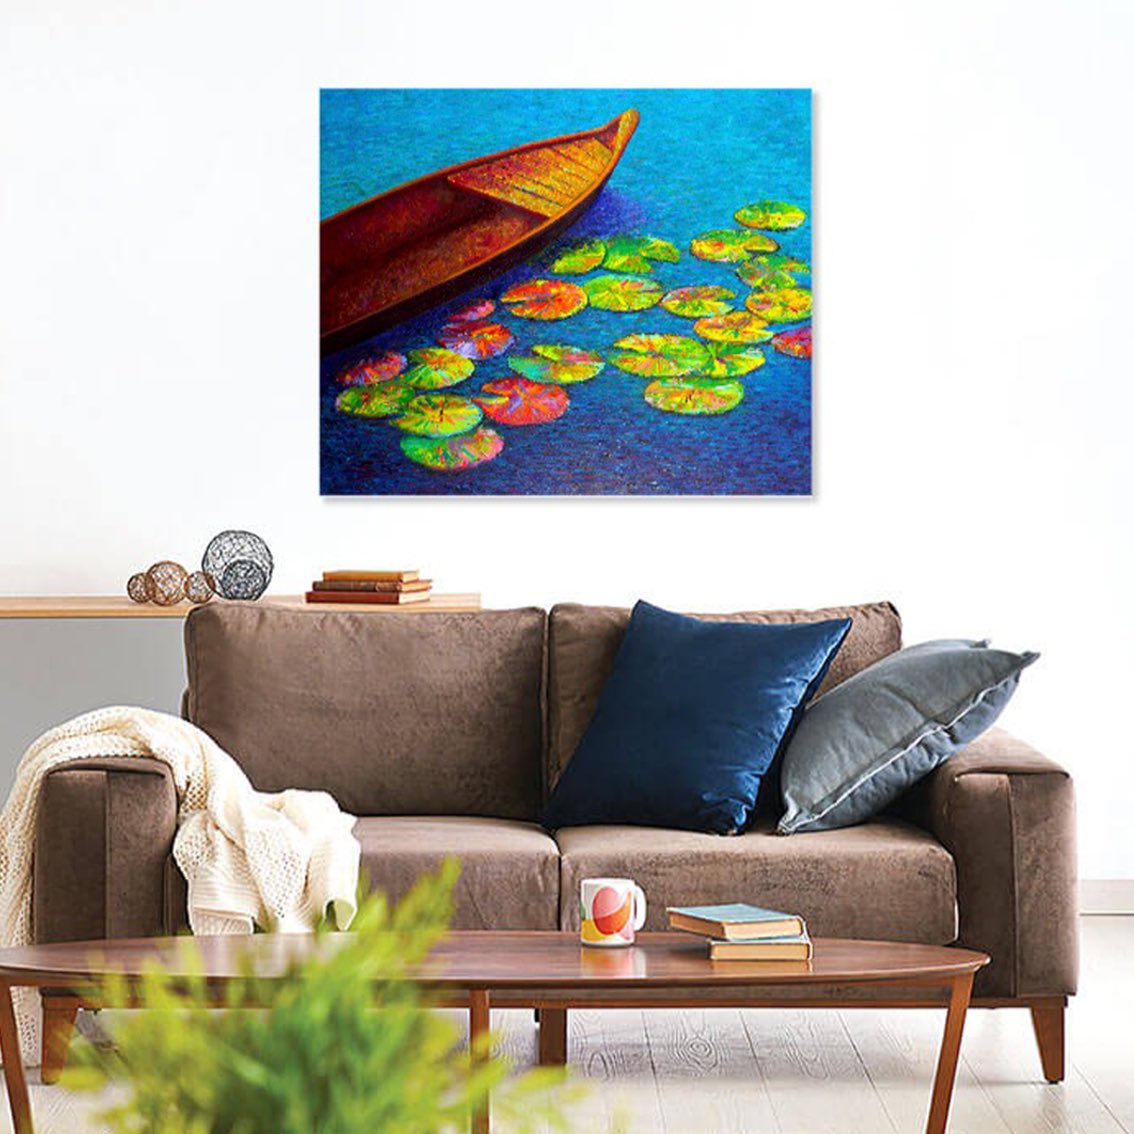 As the boat sits on a serene lake adorned with vibrant water lilies capturing the essence of tranquility, inviting you to bring a touch of calm and colour into your space. #artprints 
#waterlilies #vibrantartwork #fingerpainting #fingerpaintingartist